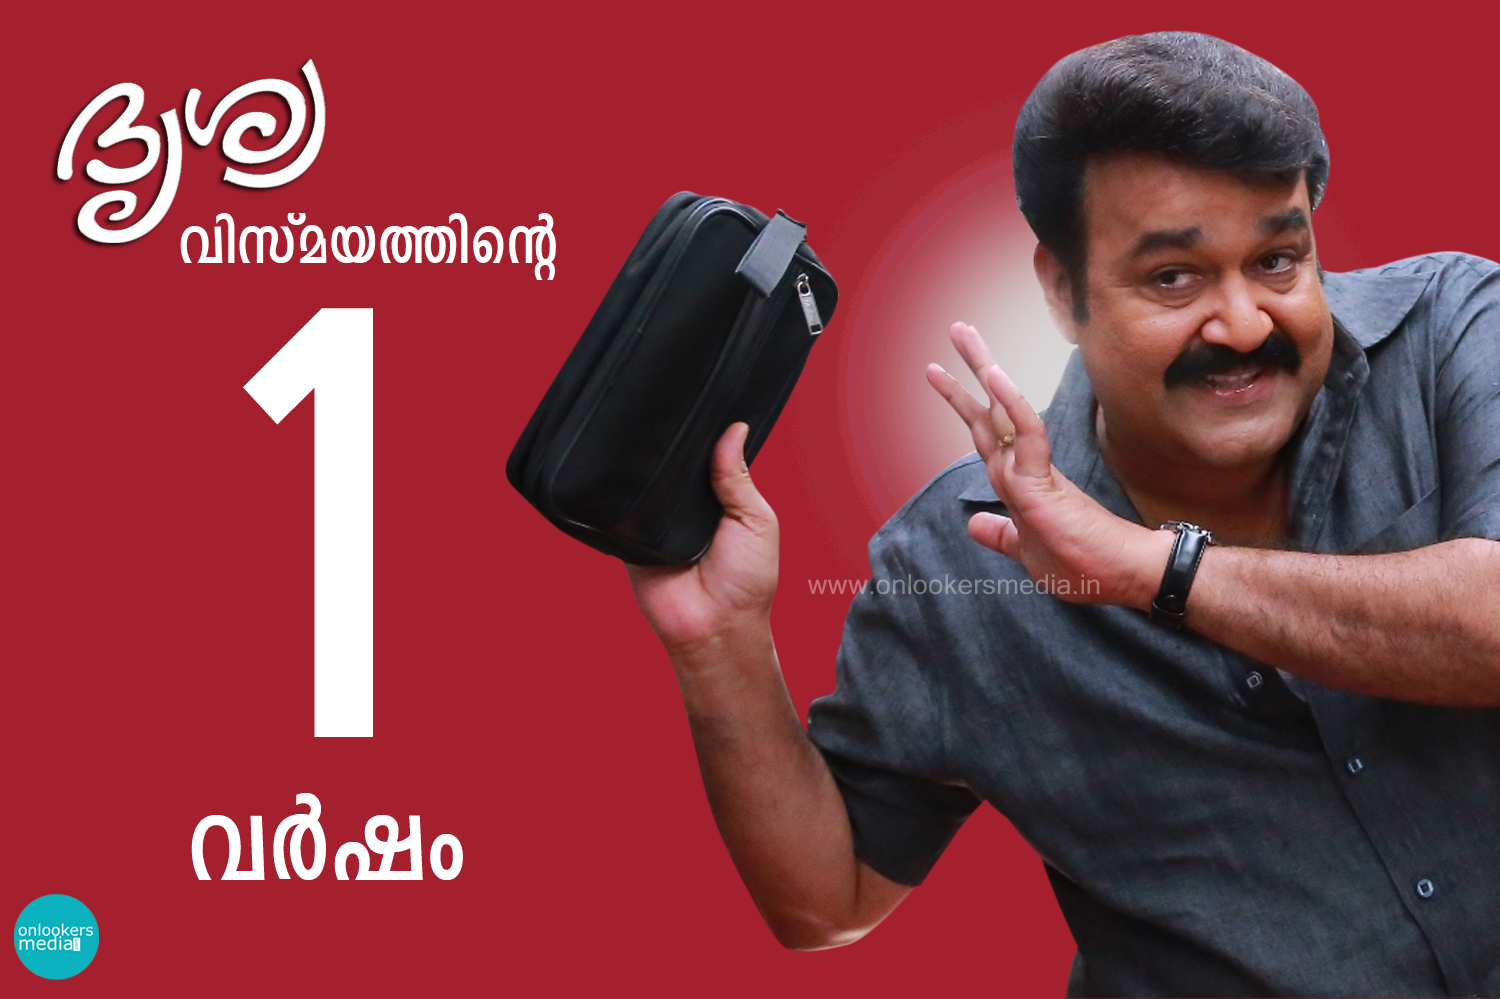 First anniversary of the wonder named Drishyam-Mohanlal-Onlookers Media